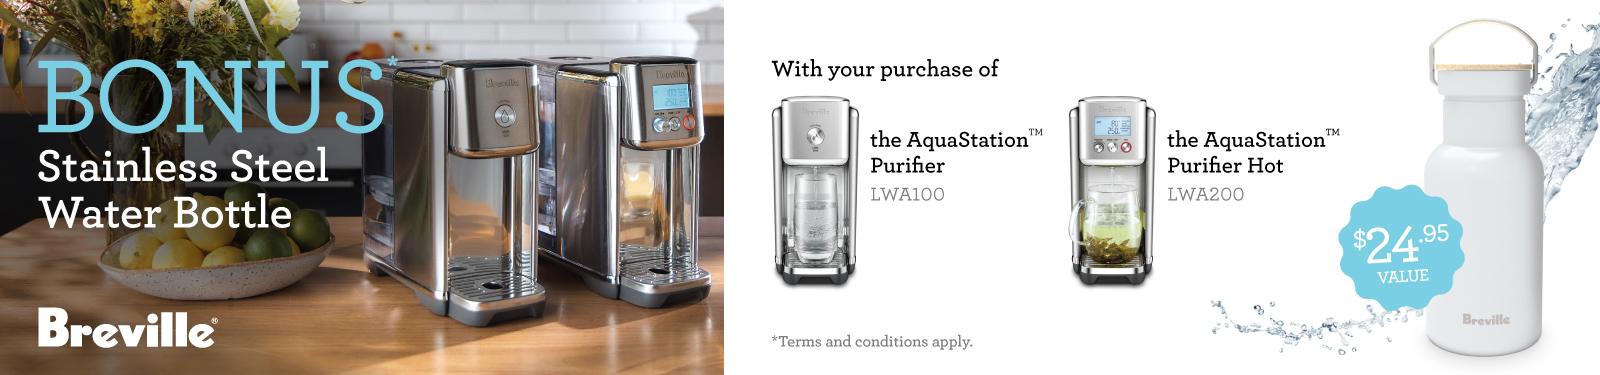 Bonus Stainless Steel Water Bottle with selected Breville Aquastation